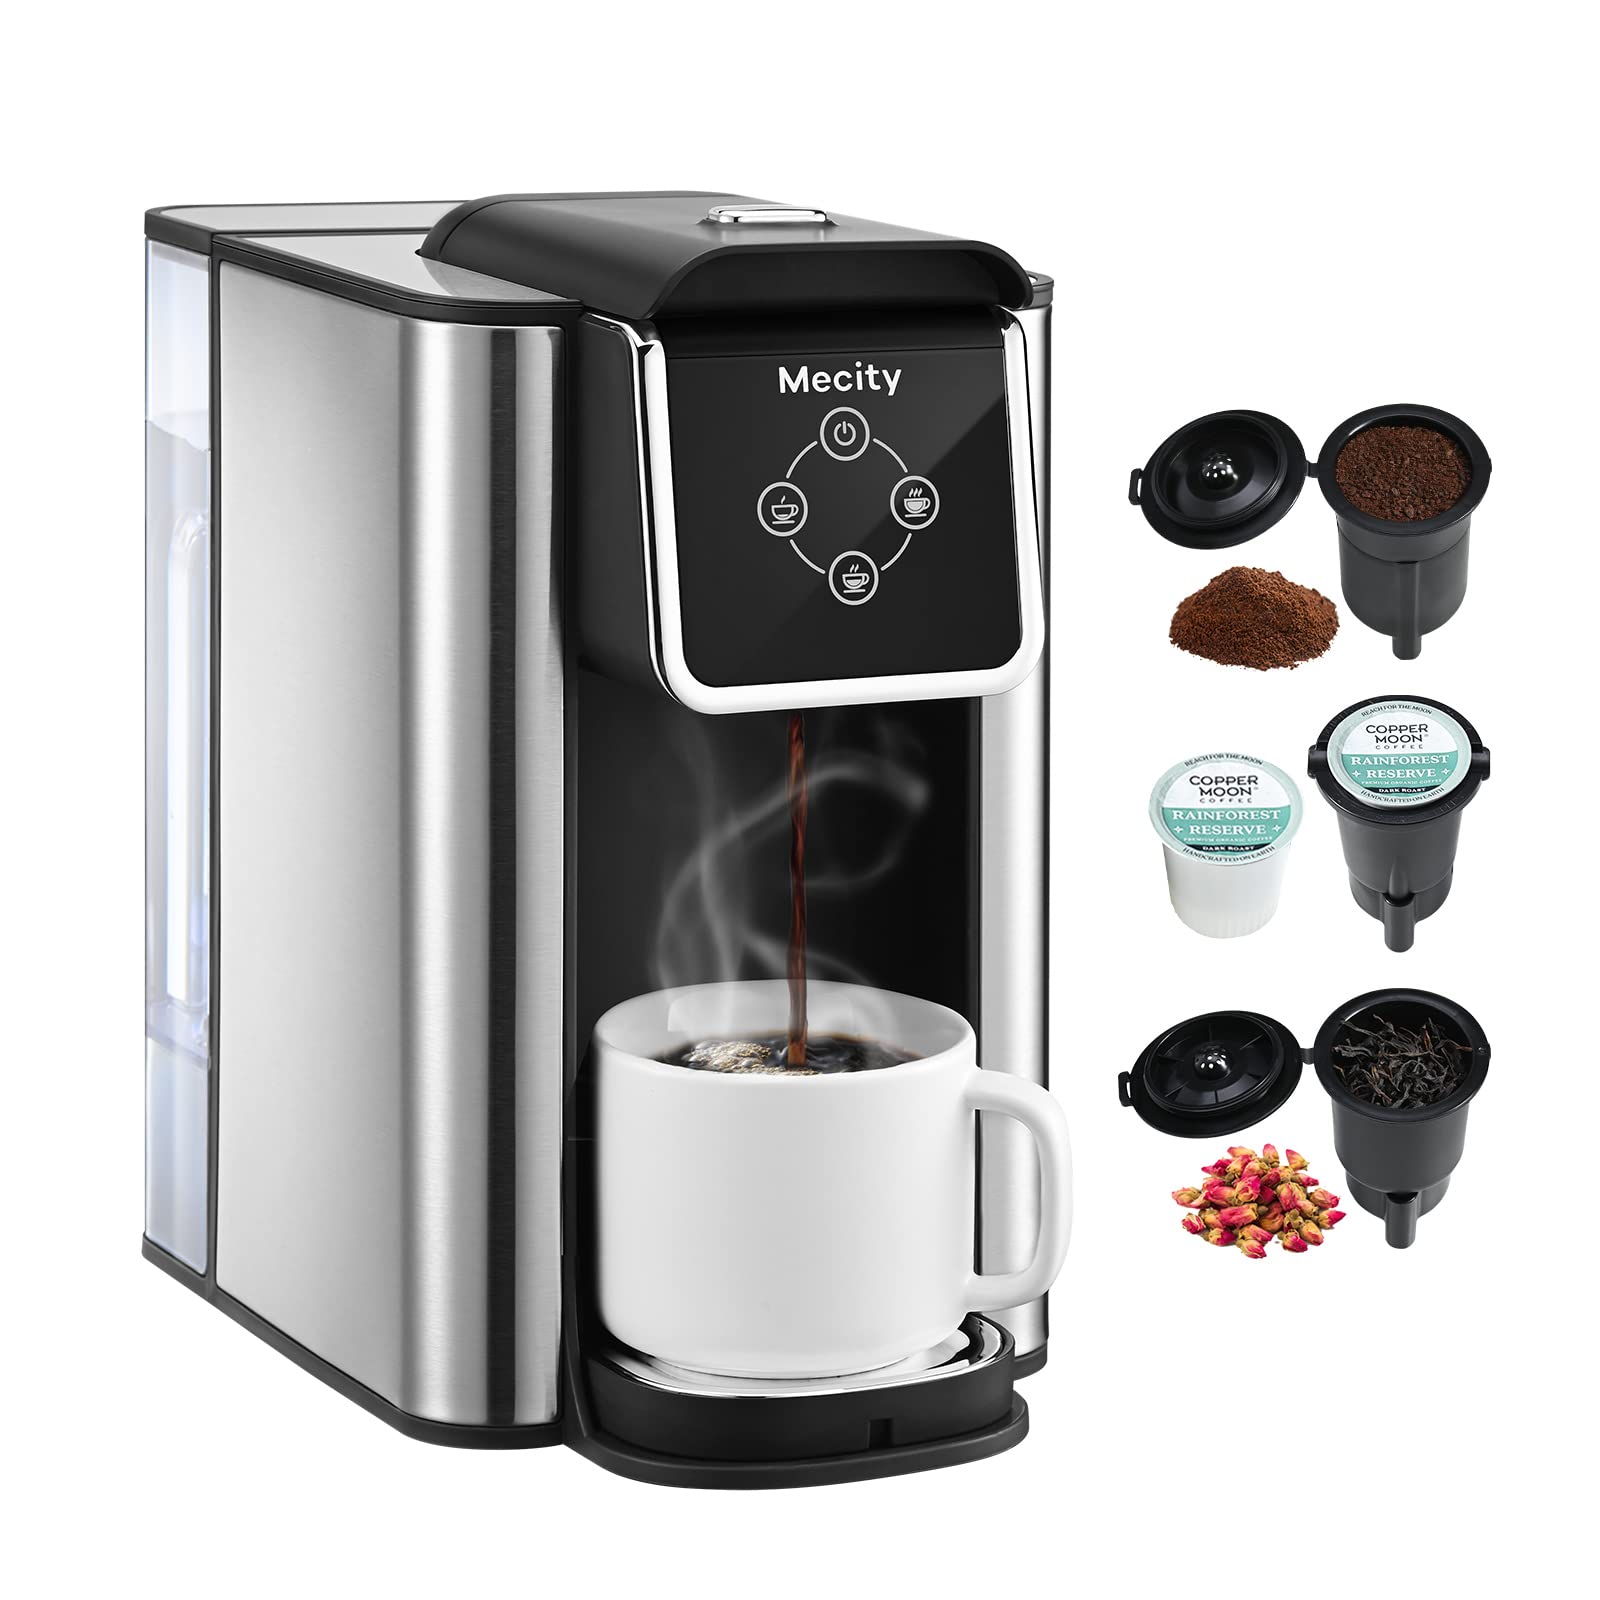  Famiworths Upgraded Hot and Iced Coffee Maker for K